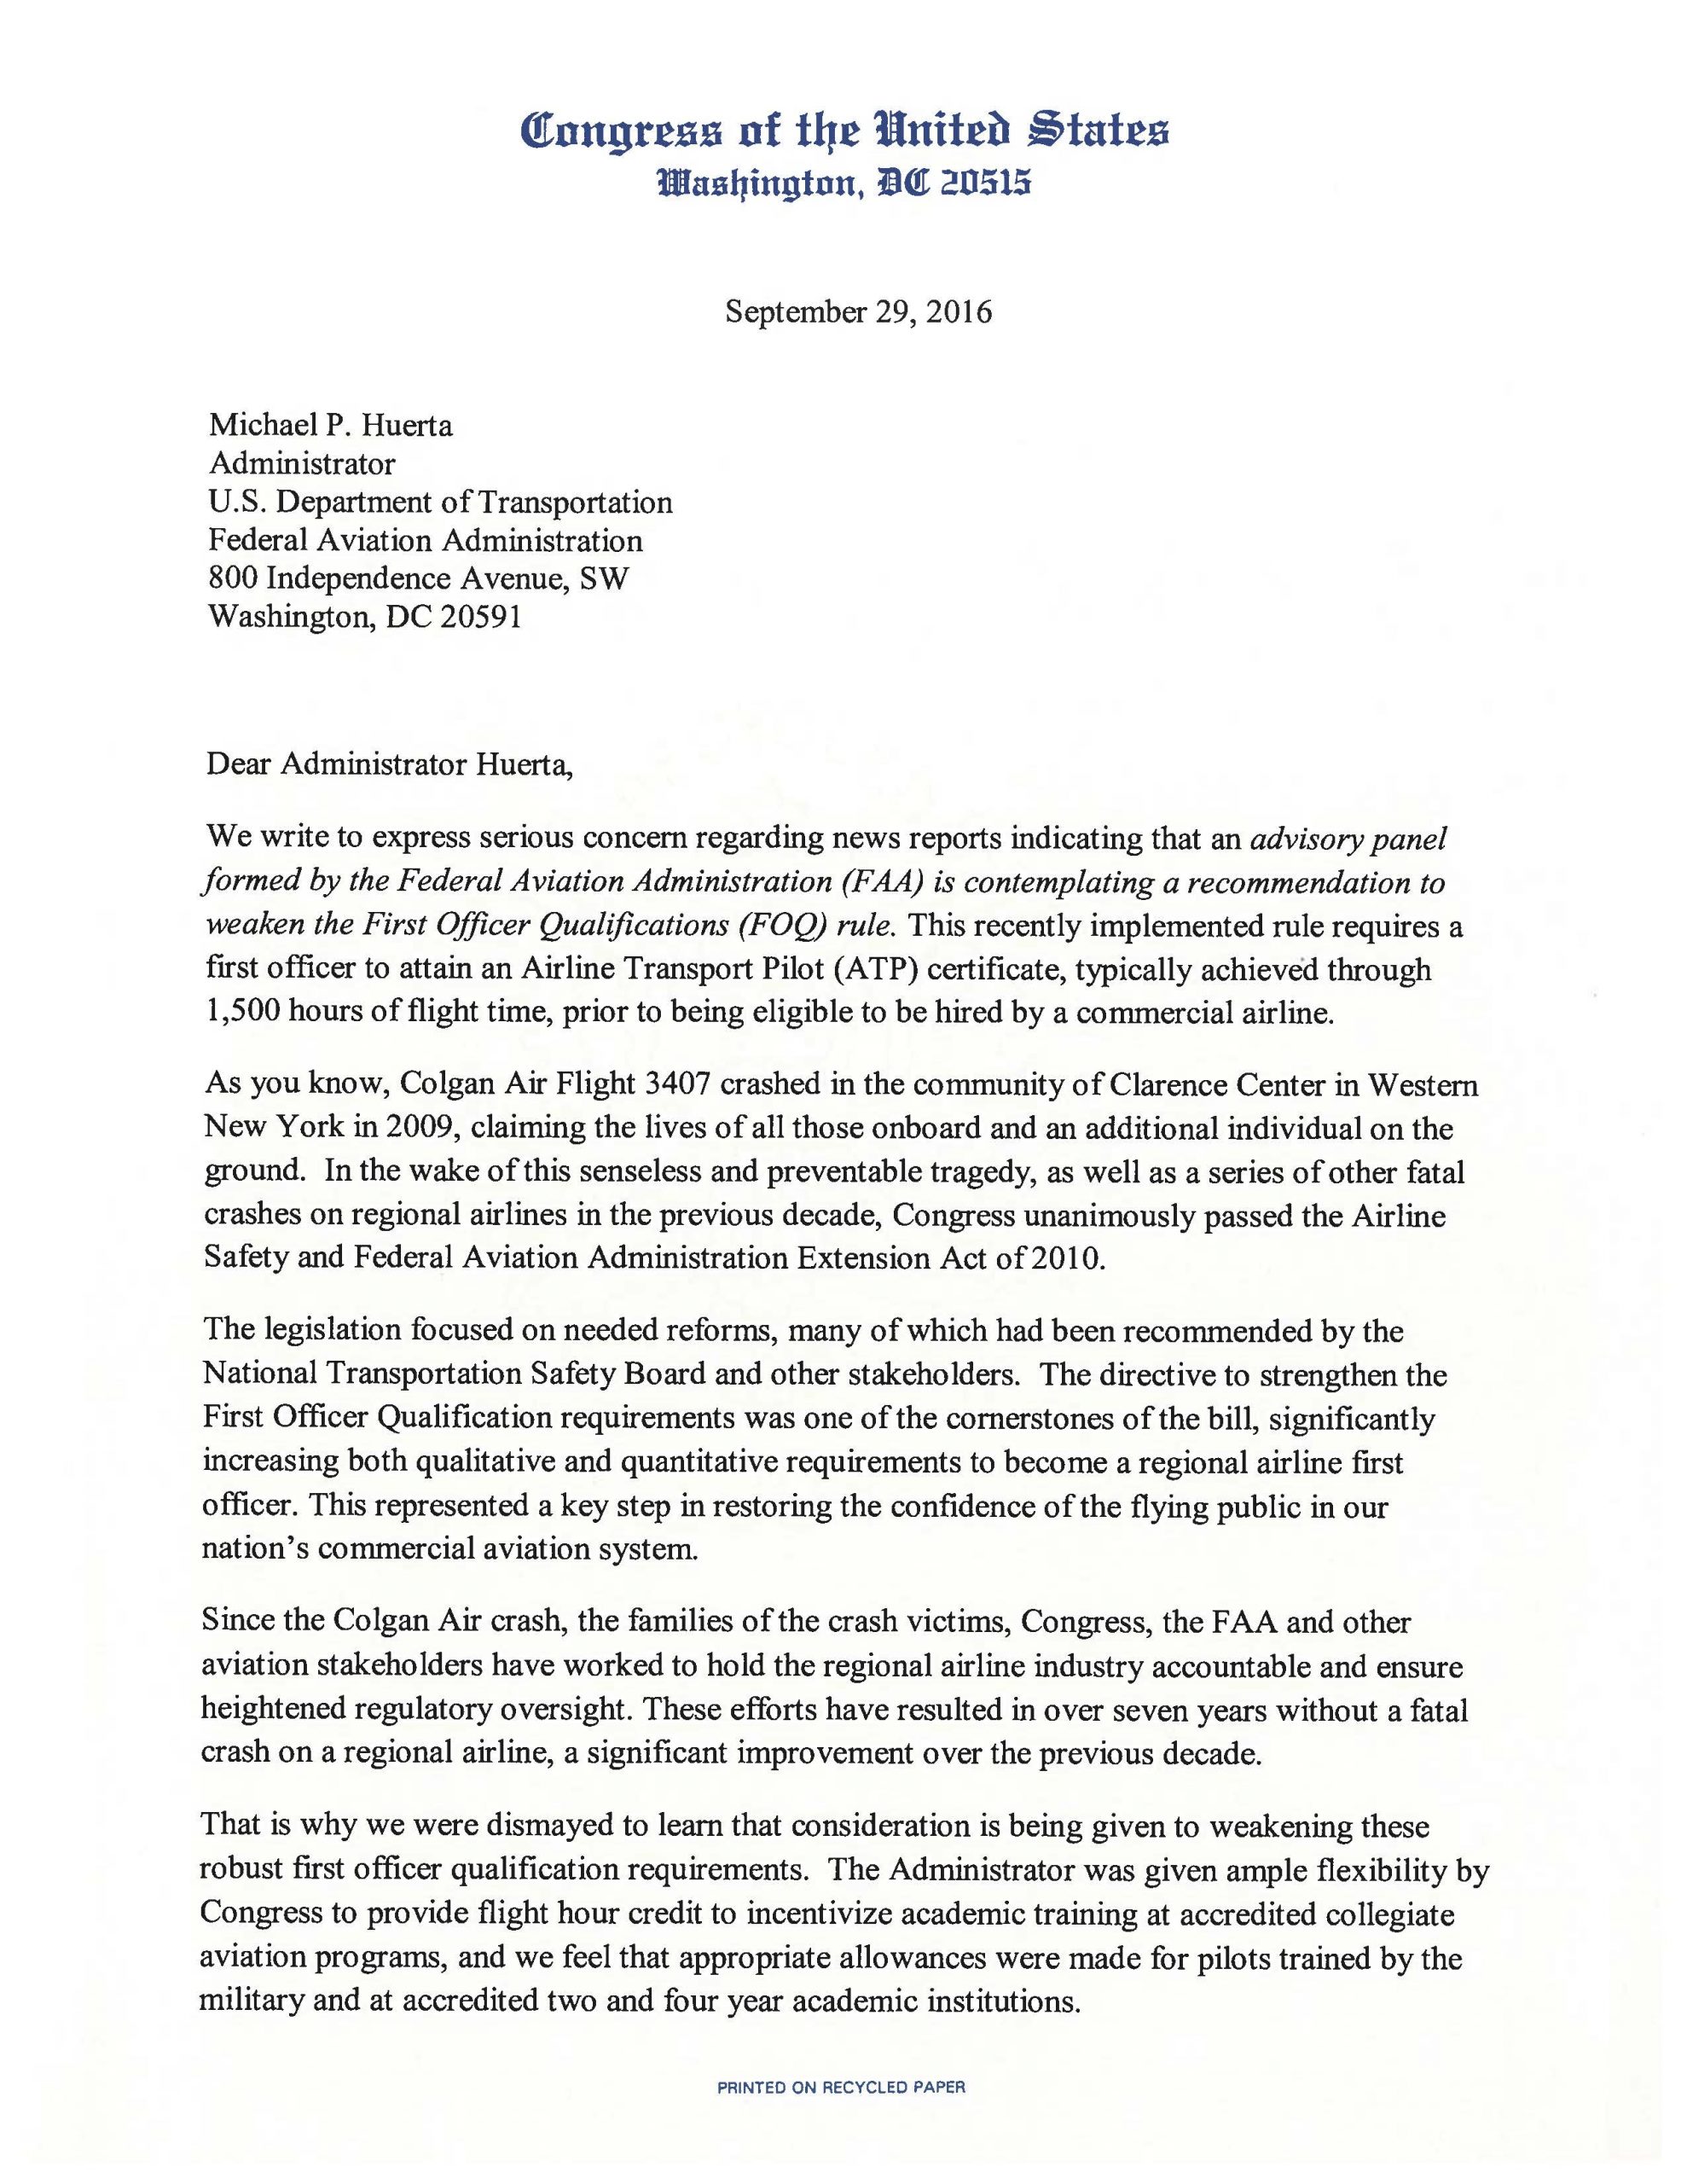 Letter Of Recommendation For Administrator Meyta with size 2550 X 3300